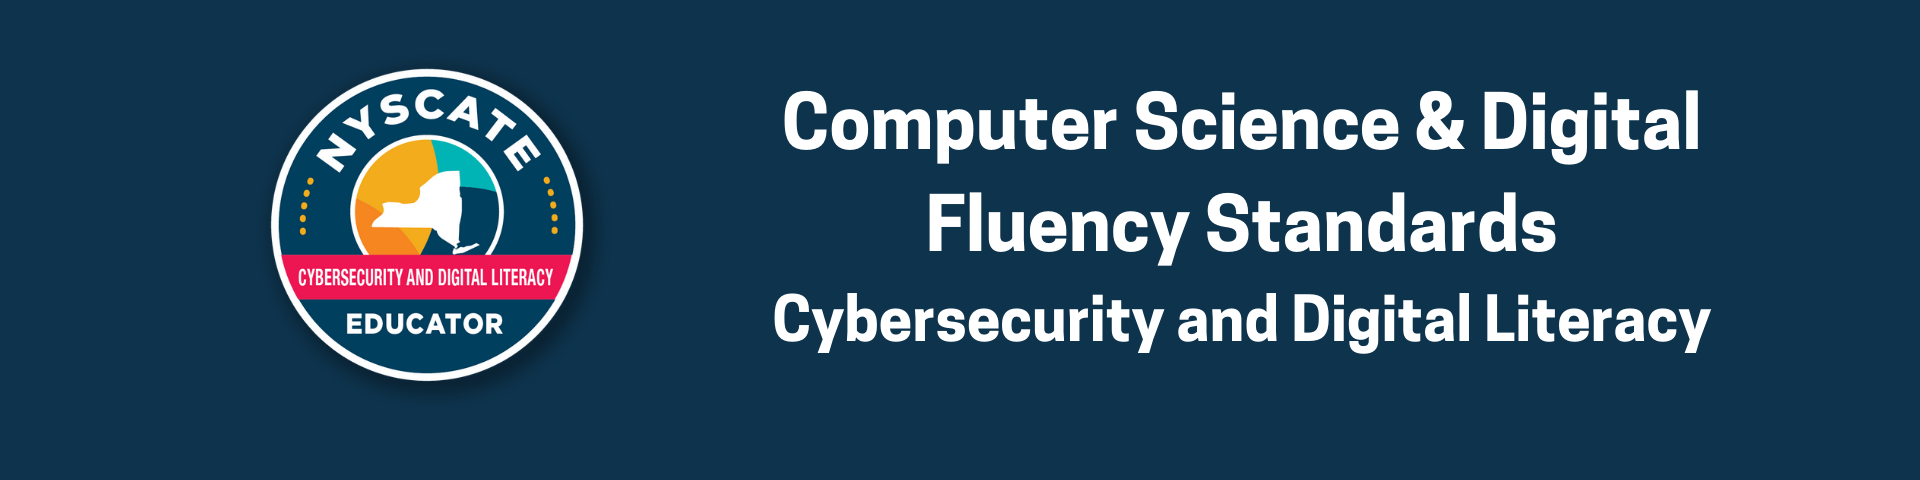 cybersecurity and digital literacy